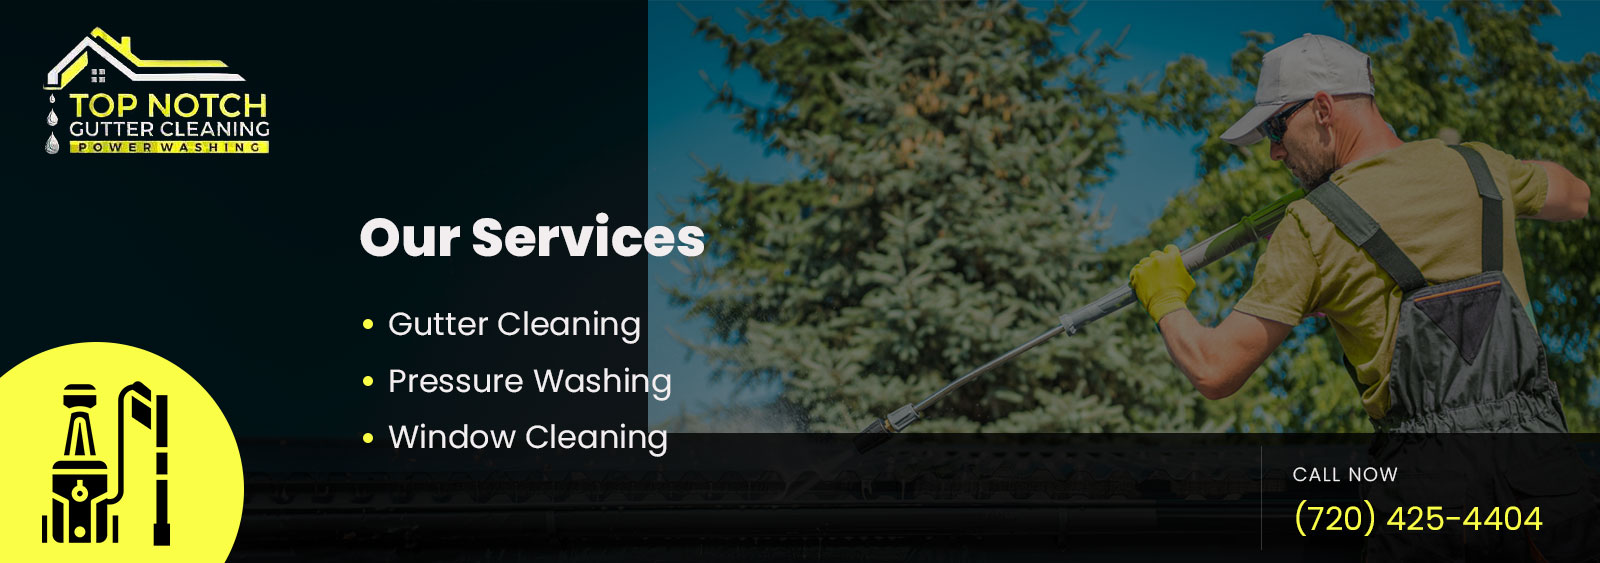 Denver Gutter Company: Top Gutter Cleaning Services, Maintenance and More for Denver's home